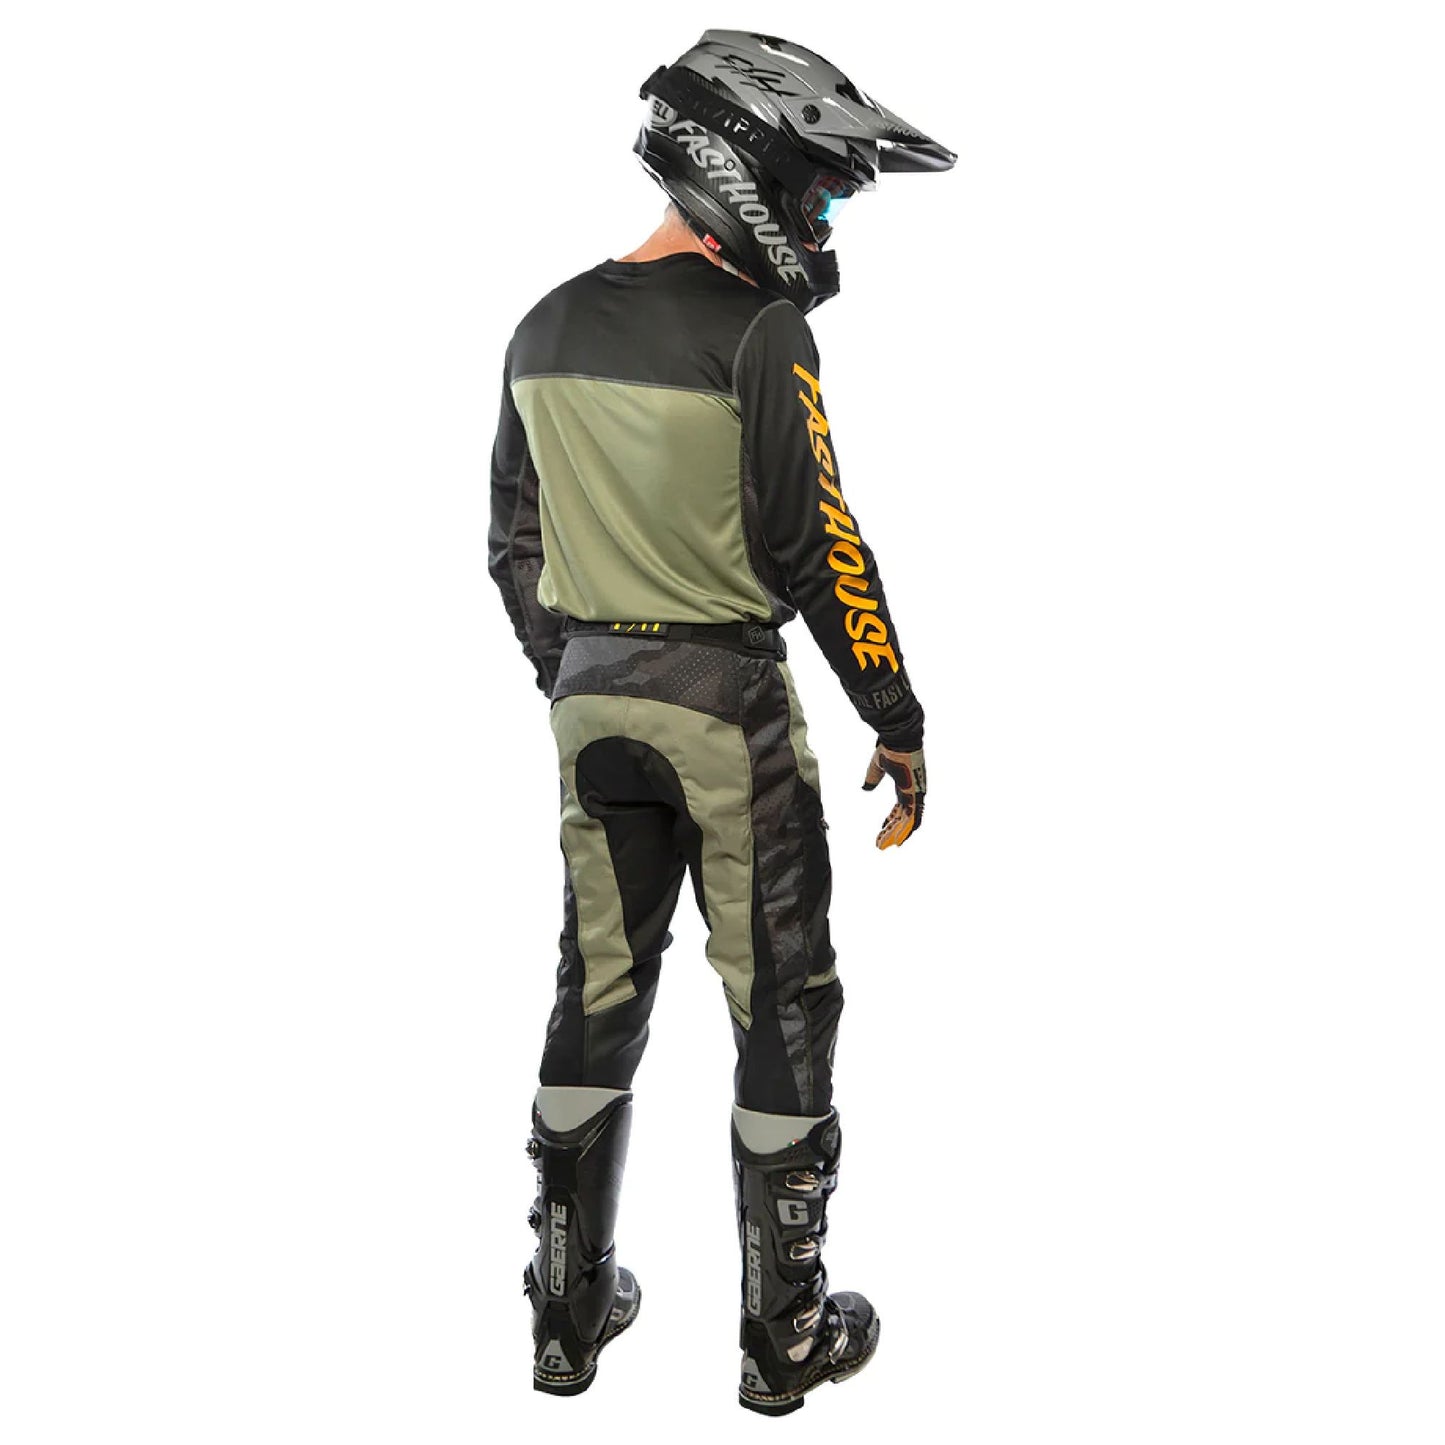 Fasthouse Off-Road Grindhouse Charge Jersey Dust Olive Bike Jerseys